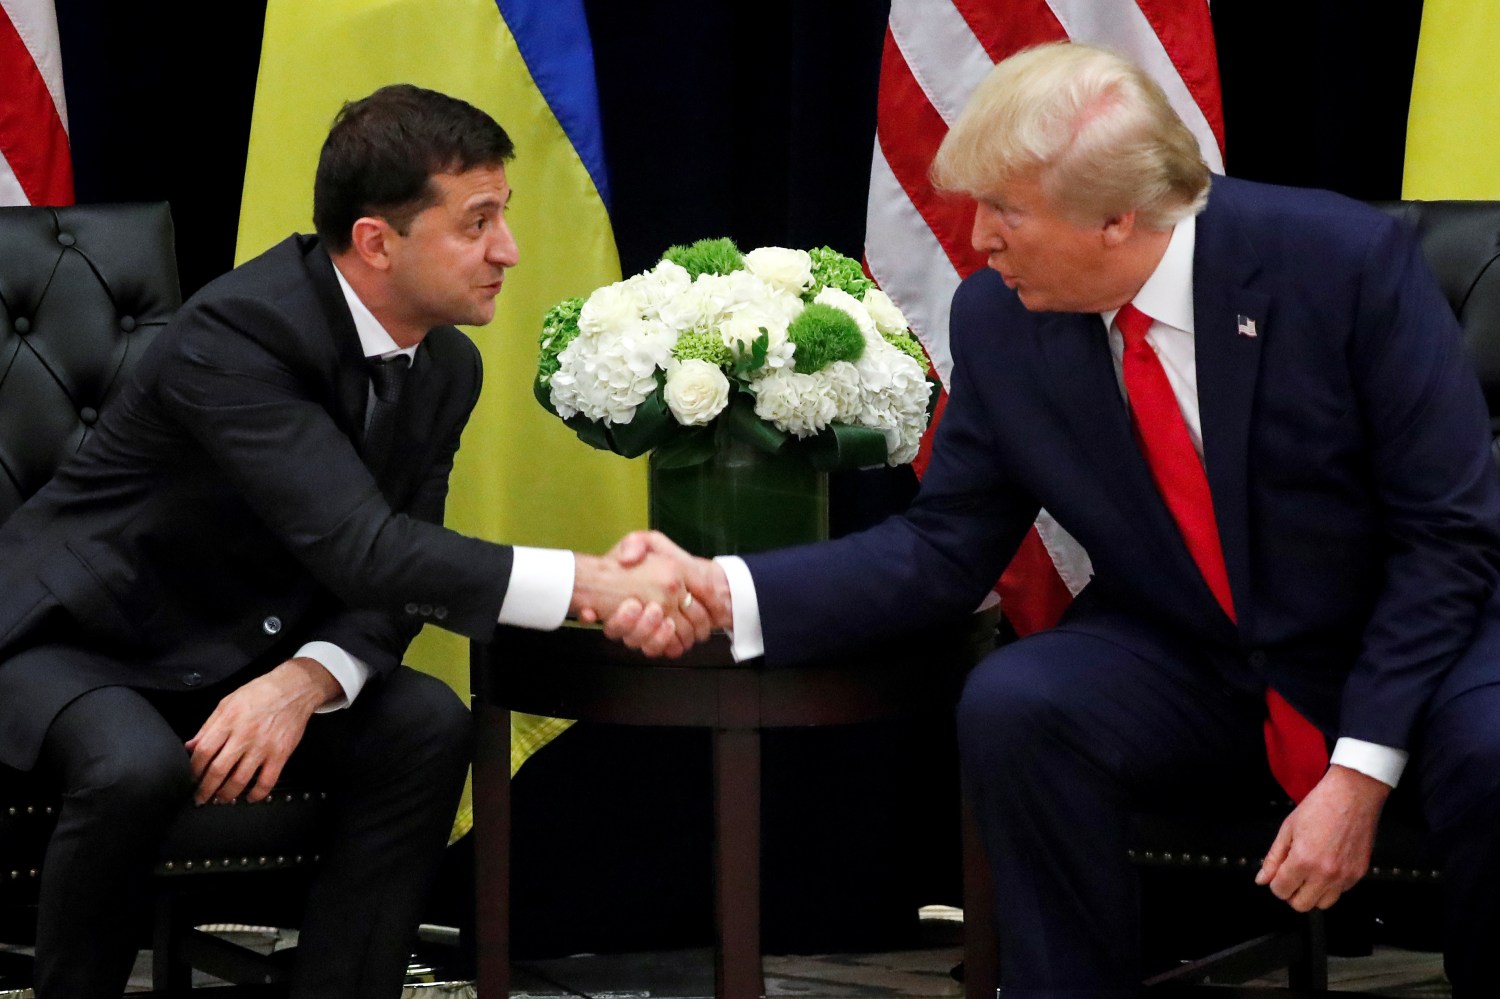 Ukraine's President Volodymyr Zelenskiy greets U.S. President Donald Trump during a bilateral meeting on the sidelines of the 74th session of the United Nations General Assembly (UNGA) in New York City, New York, U.S., September 25, 2019. REUTERS/Jonathan Ernst - RC1F5F5CFED0